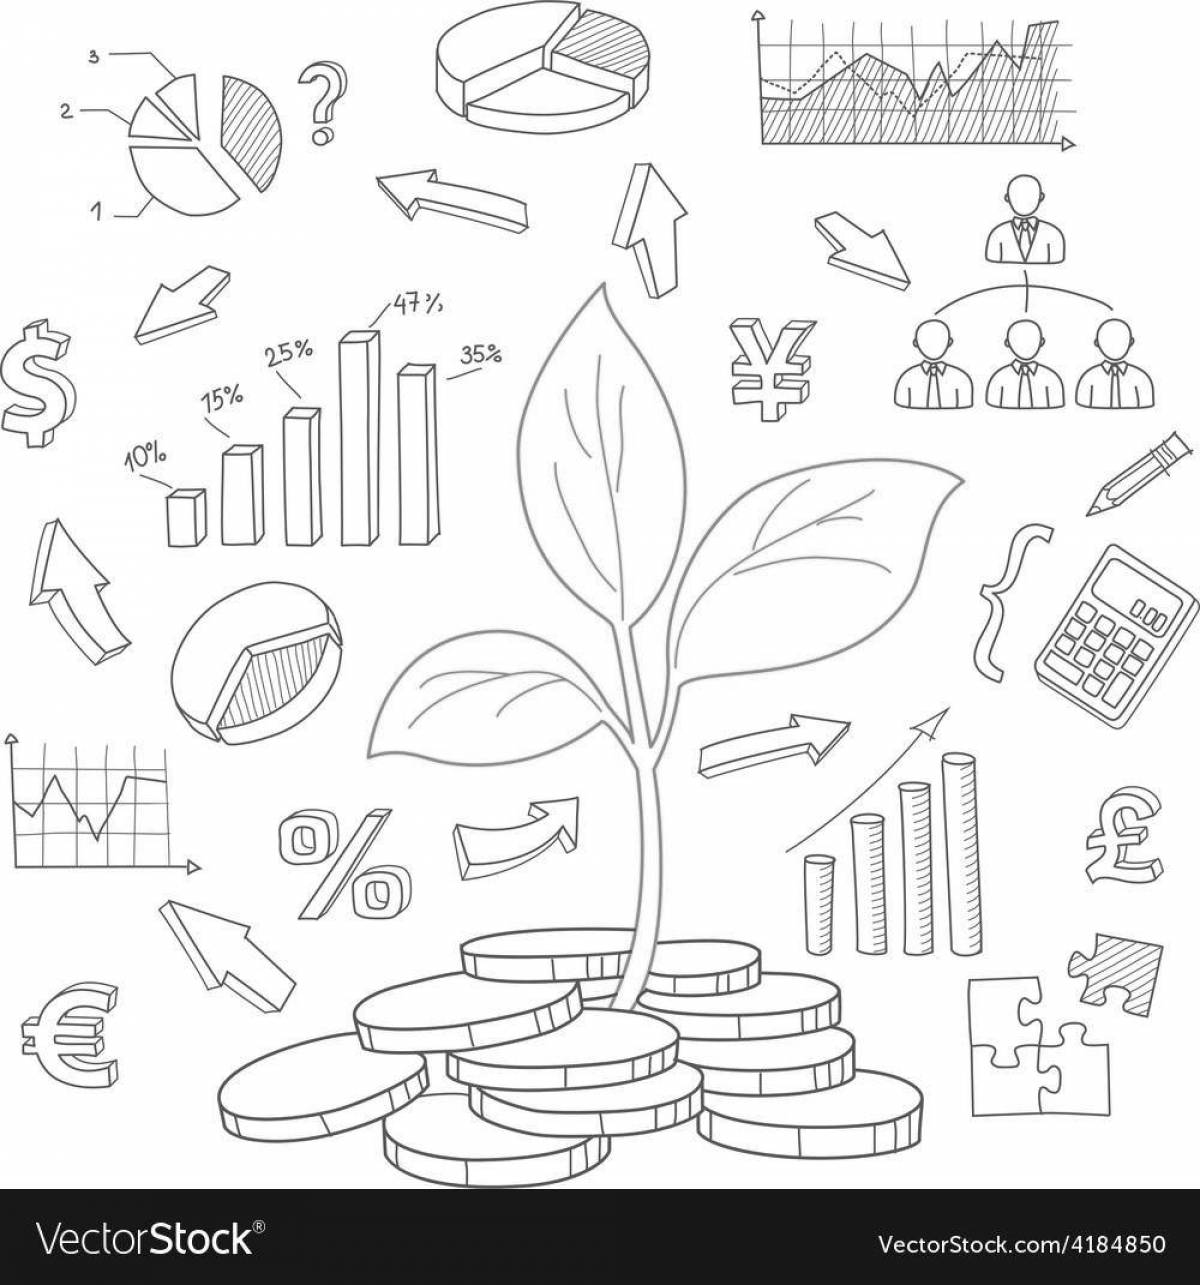 Financial literacy interactive coloring book for kids